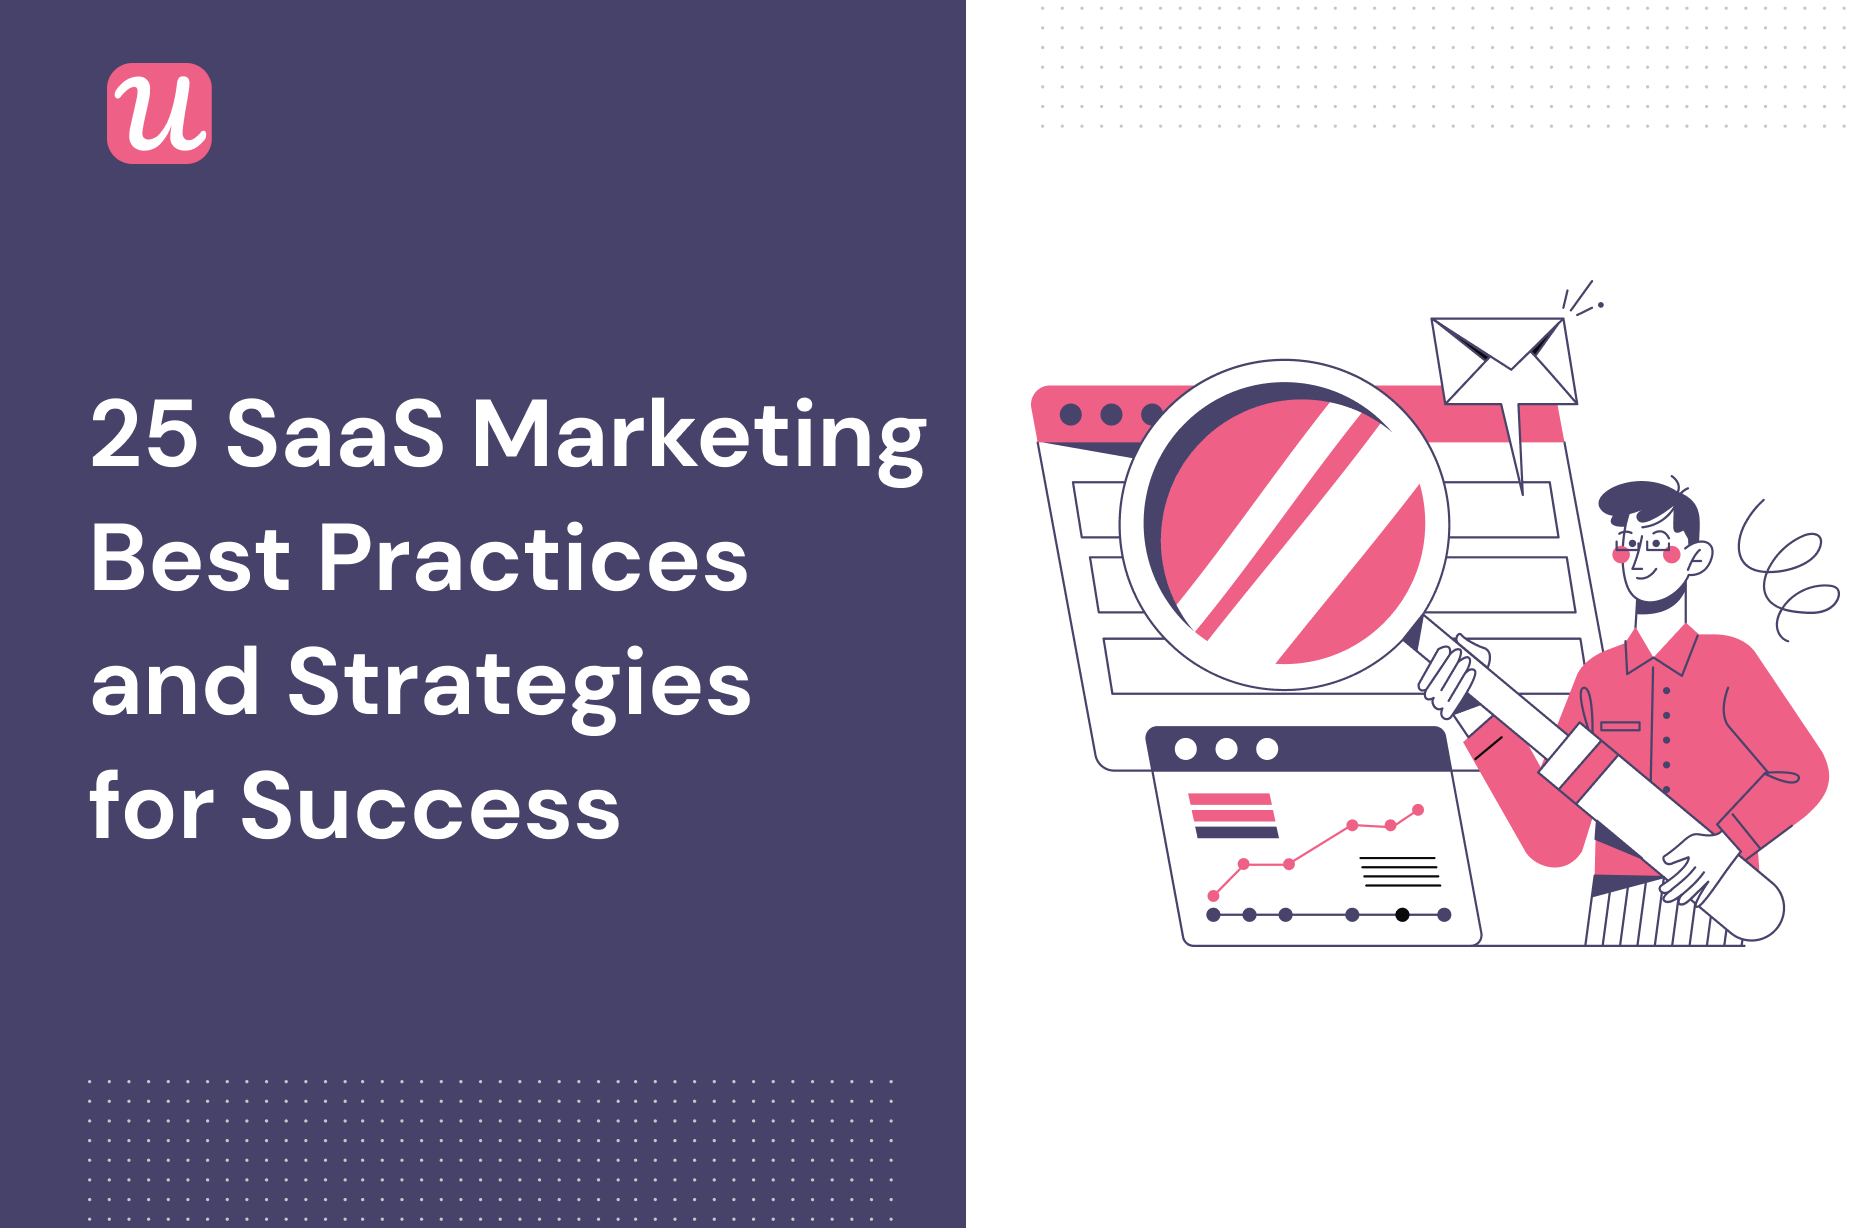 25 SaaS Marketing Best Practices And Strategies For Success